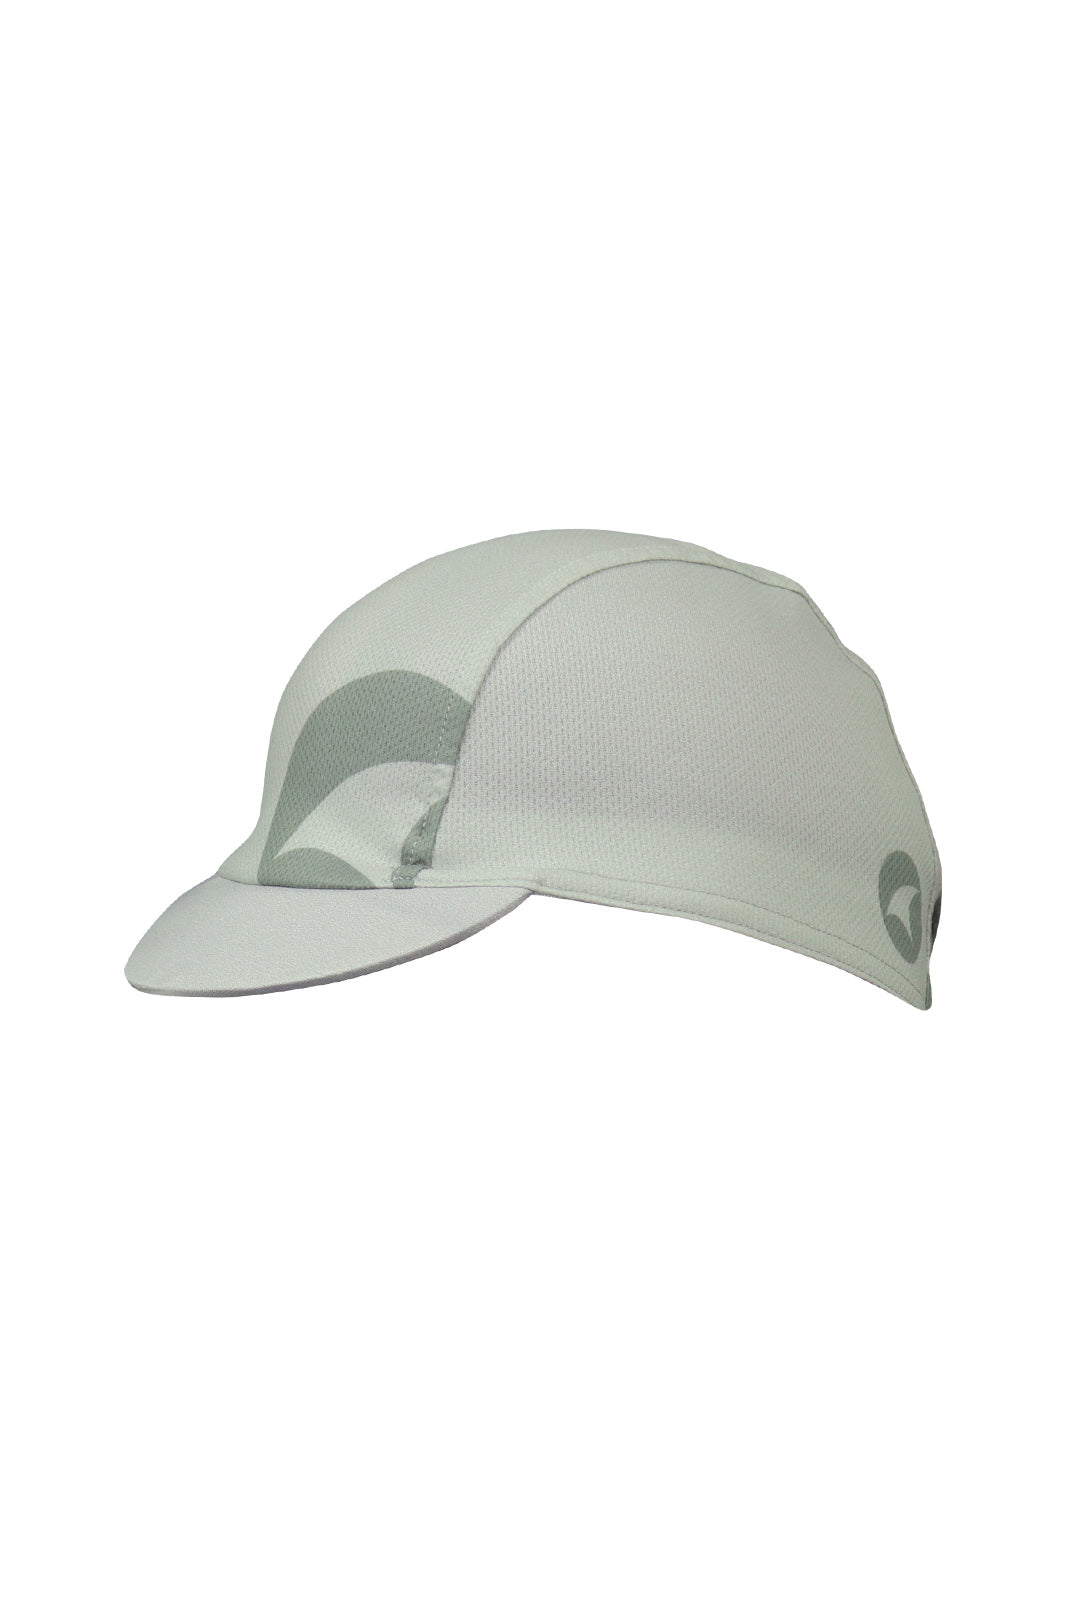 White Cycling Cap - Left View